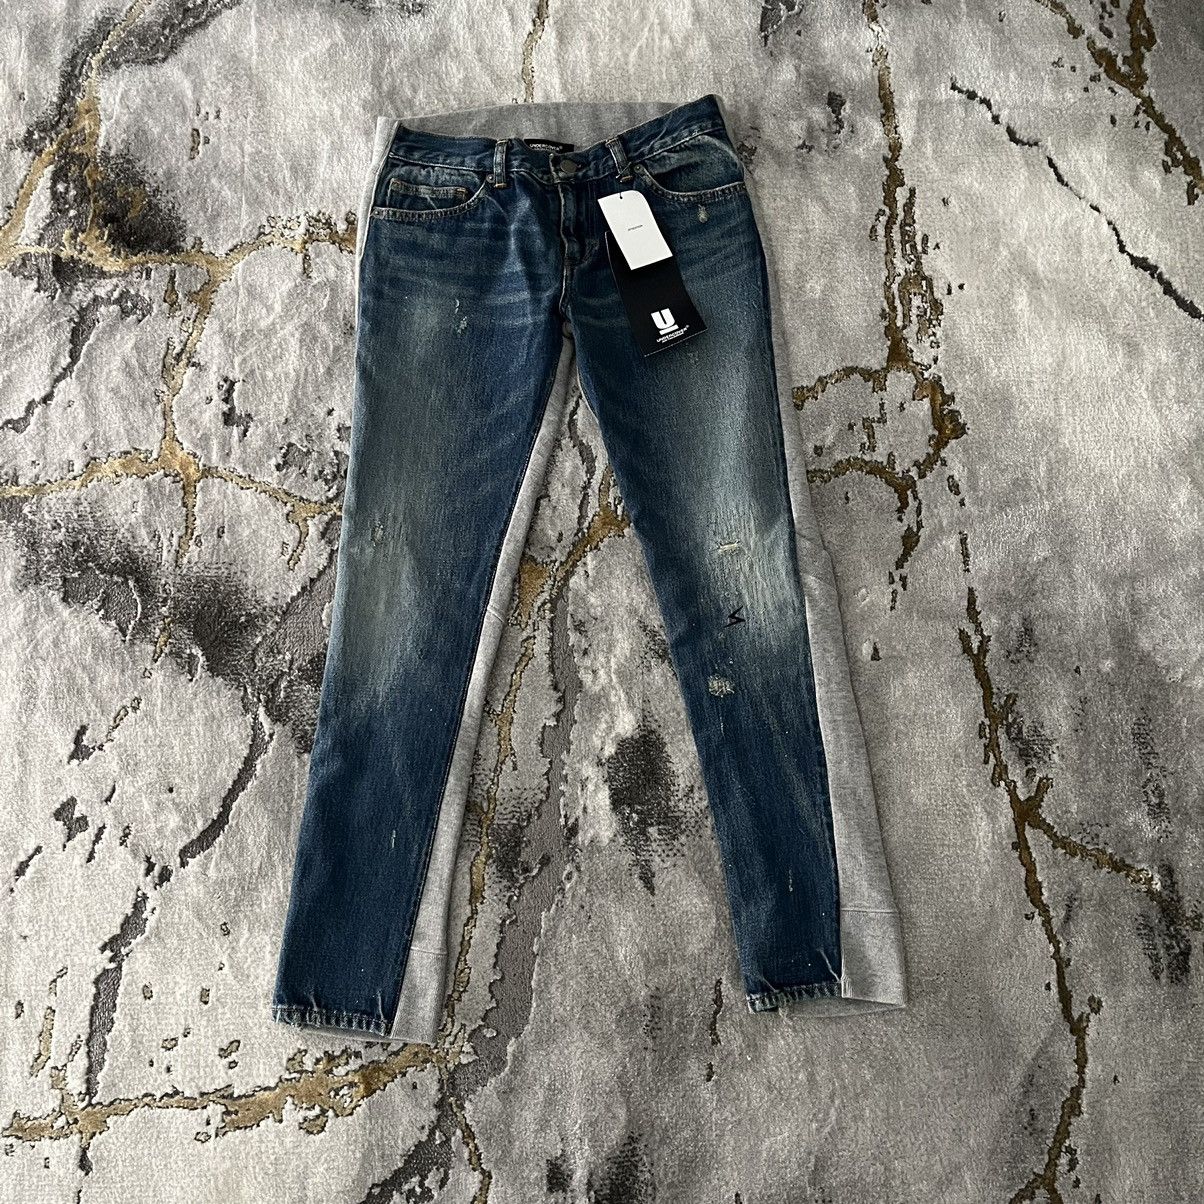 Undercover Undercover SS2011 Hybrid Jeans | Grailed